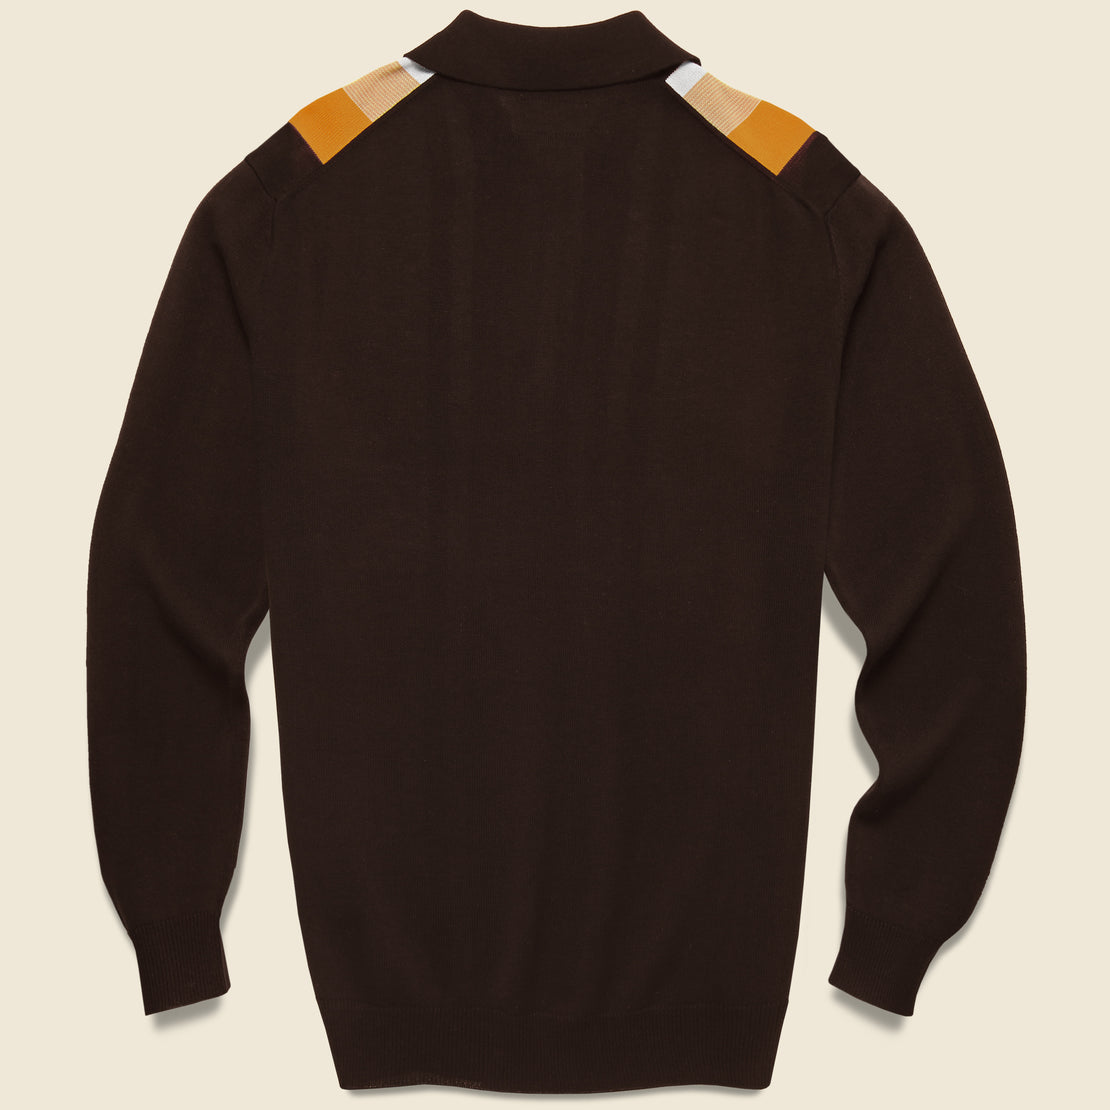 Striped Knit Polo - Brown/Gold/White - BEAMS+ - STAG Provisions - Tops - Sweater